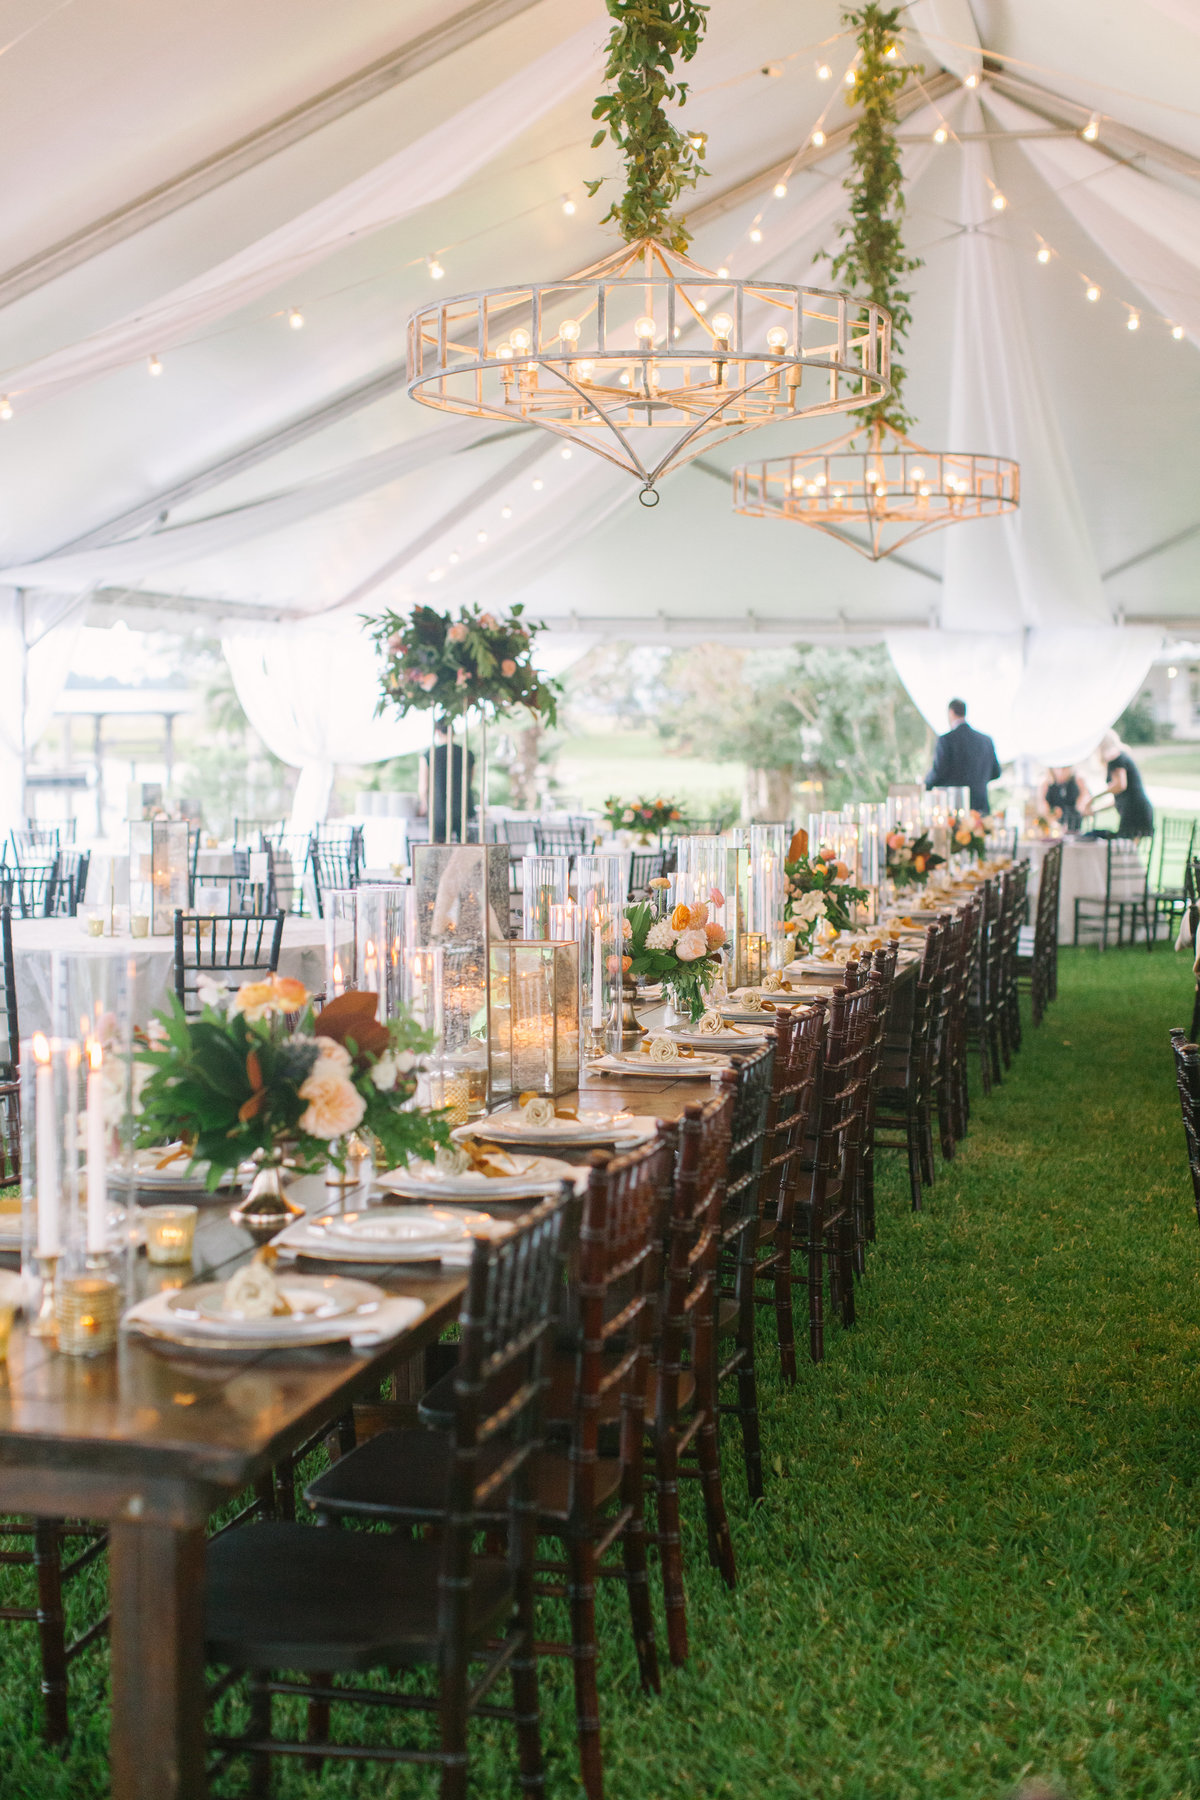 Southern Wedding Tent with Farm Tables Mahogany Chivari Chairs White Wash Chandelier Cafe Lighting Draping Candle Light